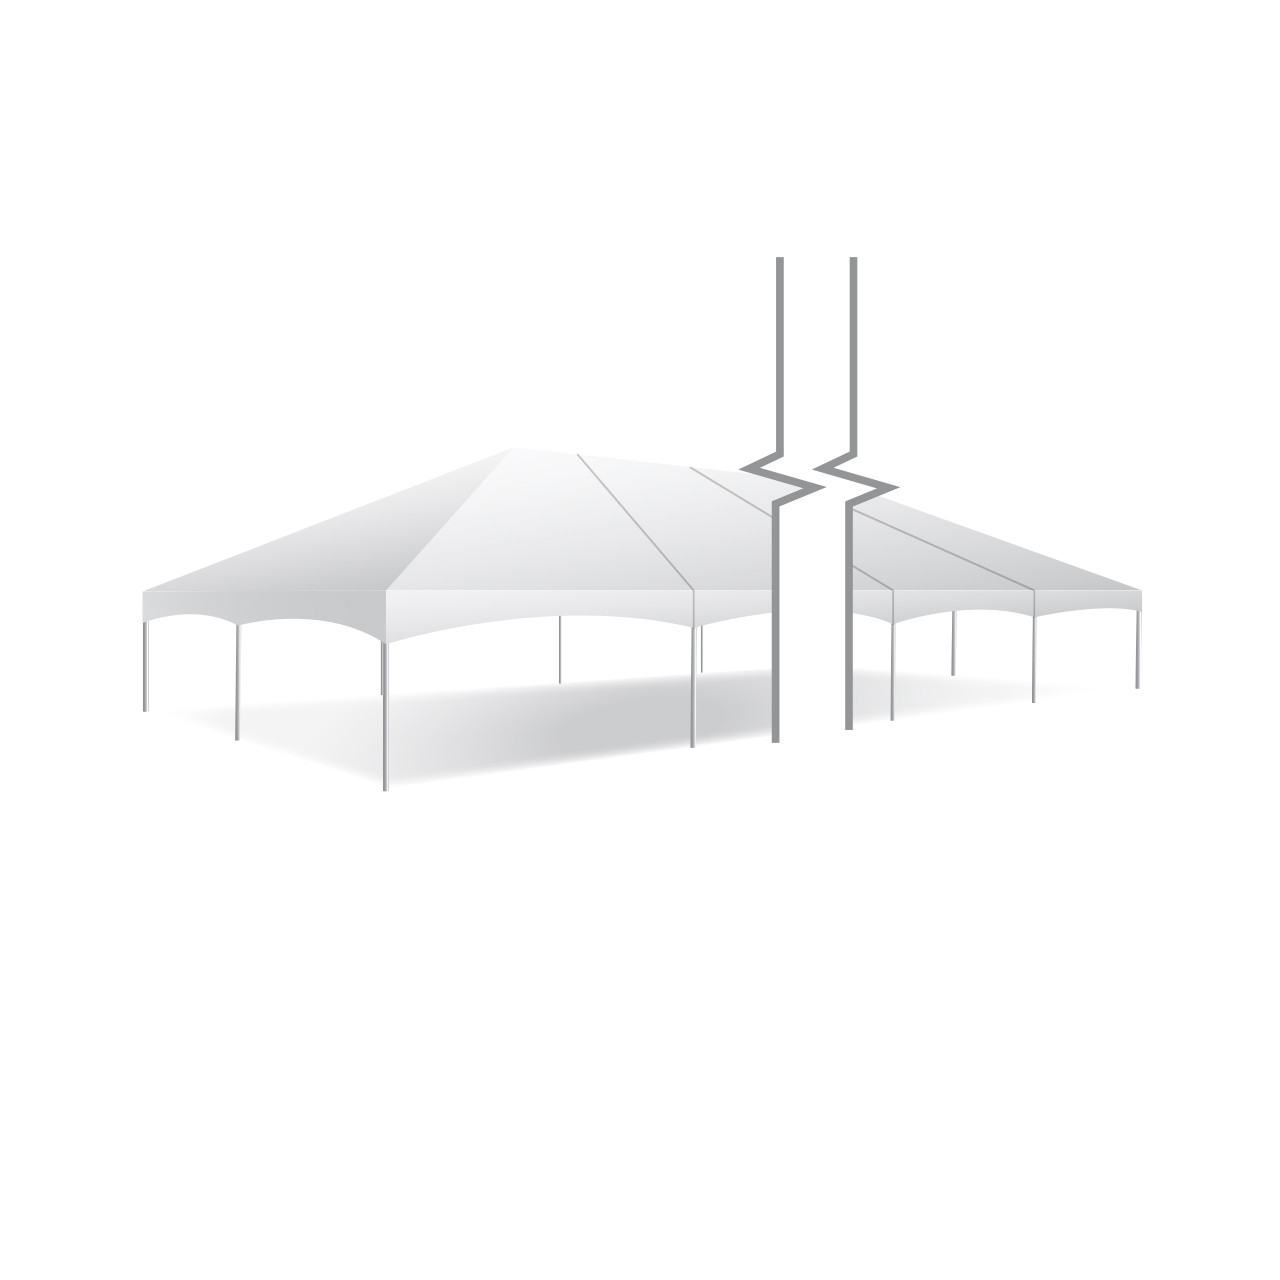 30' x 195' Master Series Frame Tent, Sectional Tent Top, Complete